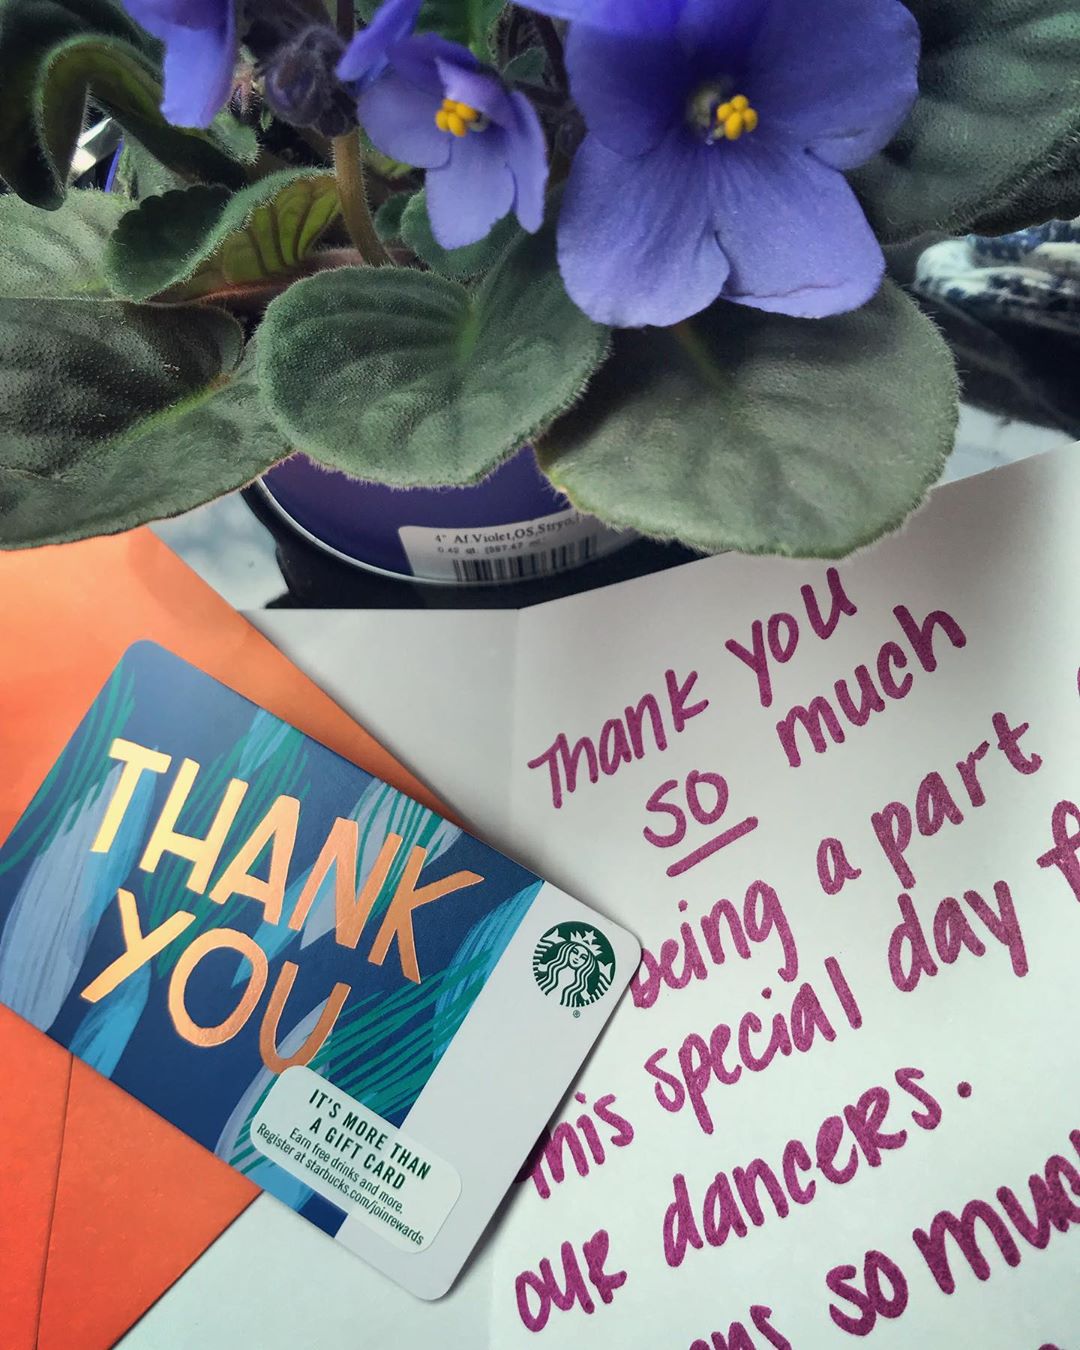 Thank you note and gift card on table. Photo by Instagram user @_bodybybabbs